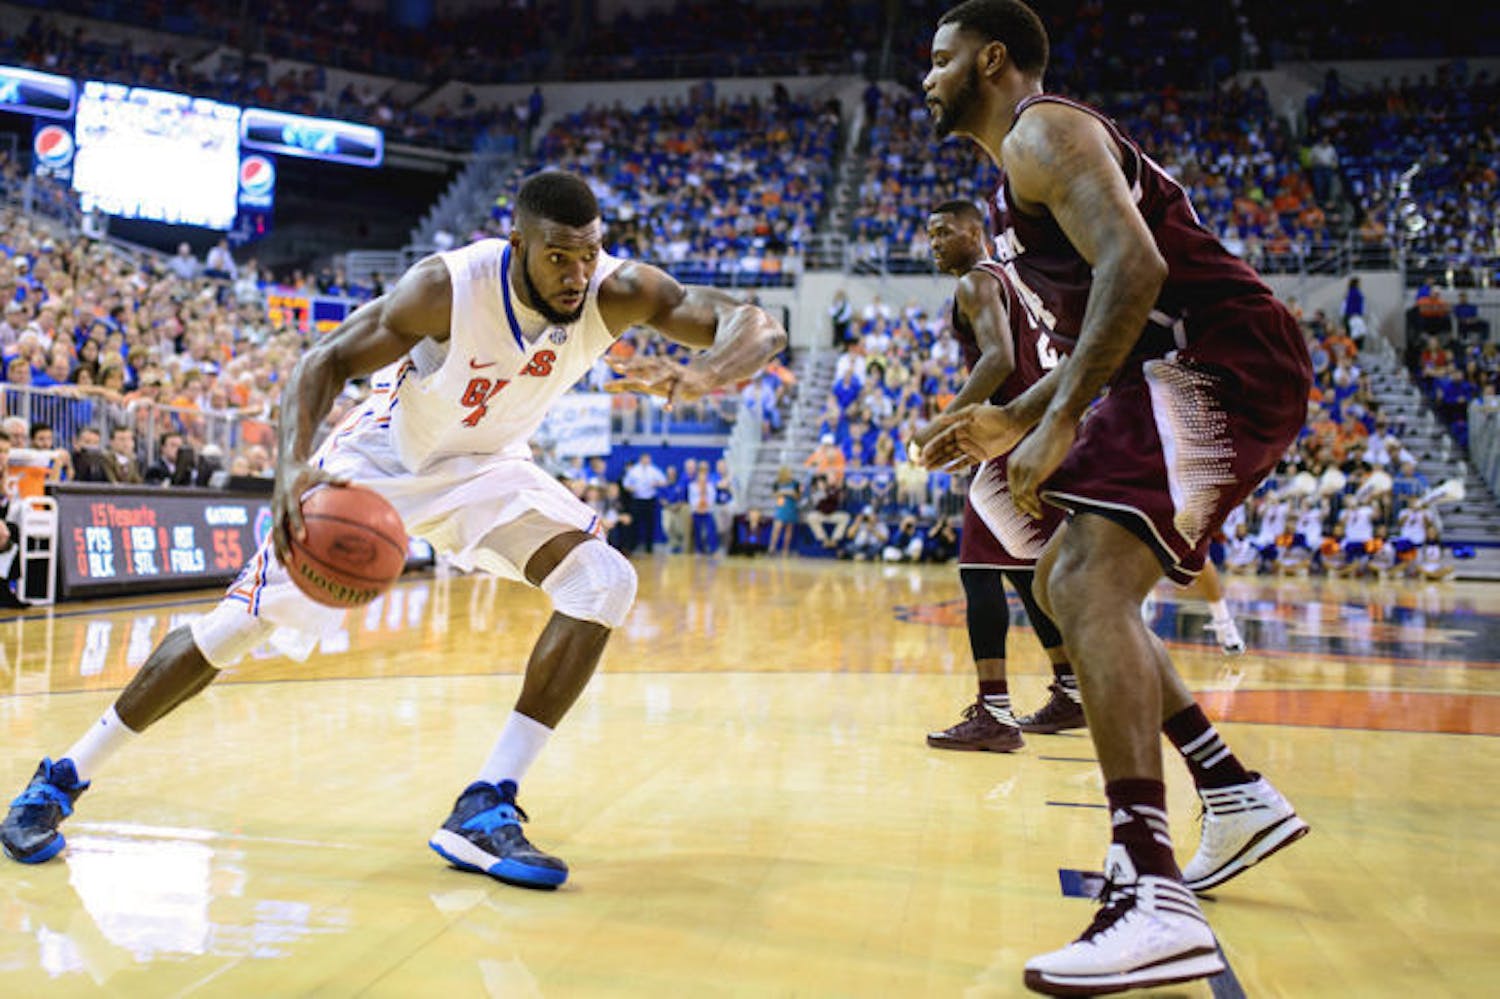 Patric Young drives into the paint against Texas A&amp;M on Saturday. Young’s career-high 14 rebounds helped Florida win its 13th straight Southeastern Conference home game. Young fell short of a double-double, notching nine points against the Aggies.